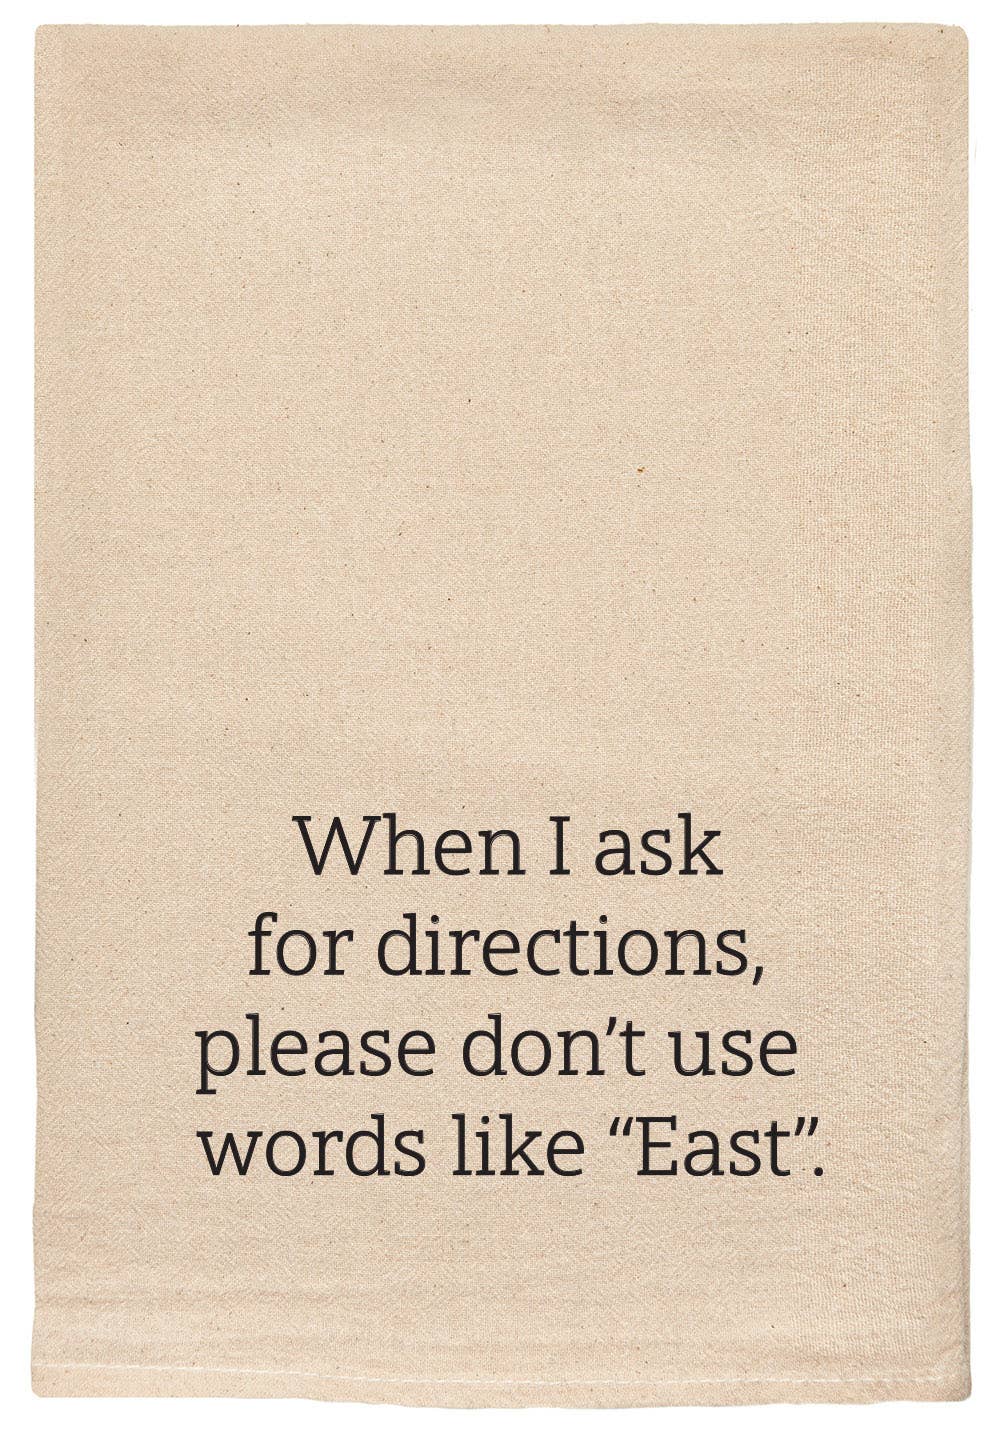 ellembee gift - Ask For Directions comical and funny Kitchen Tea Towel